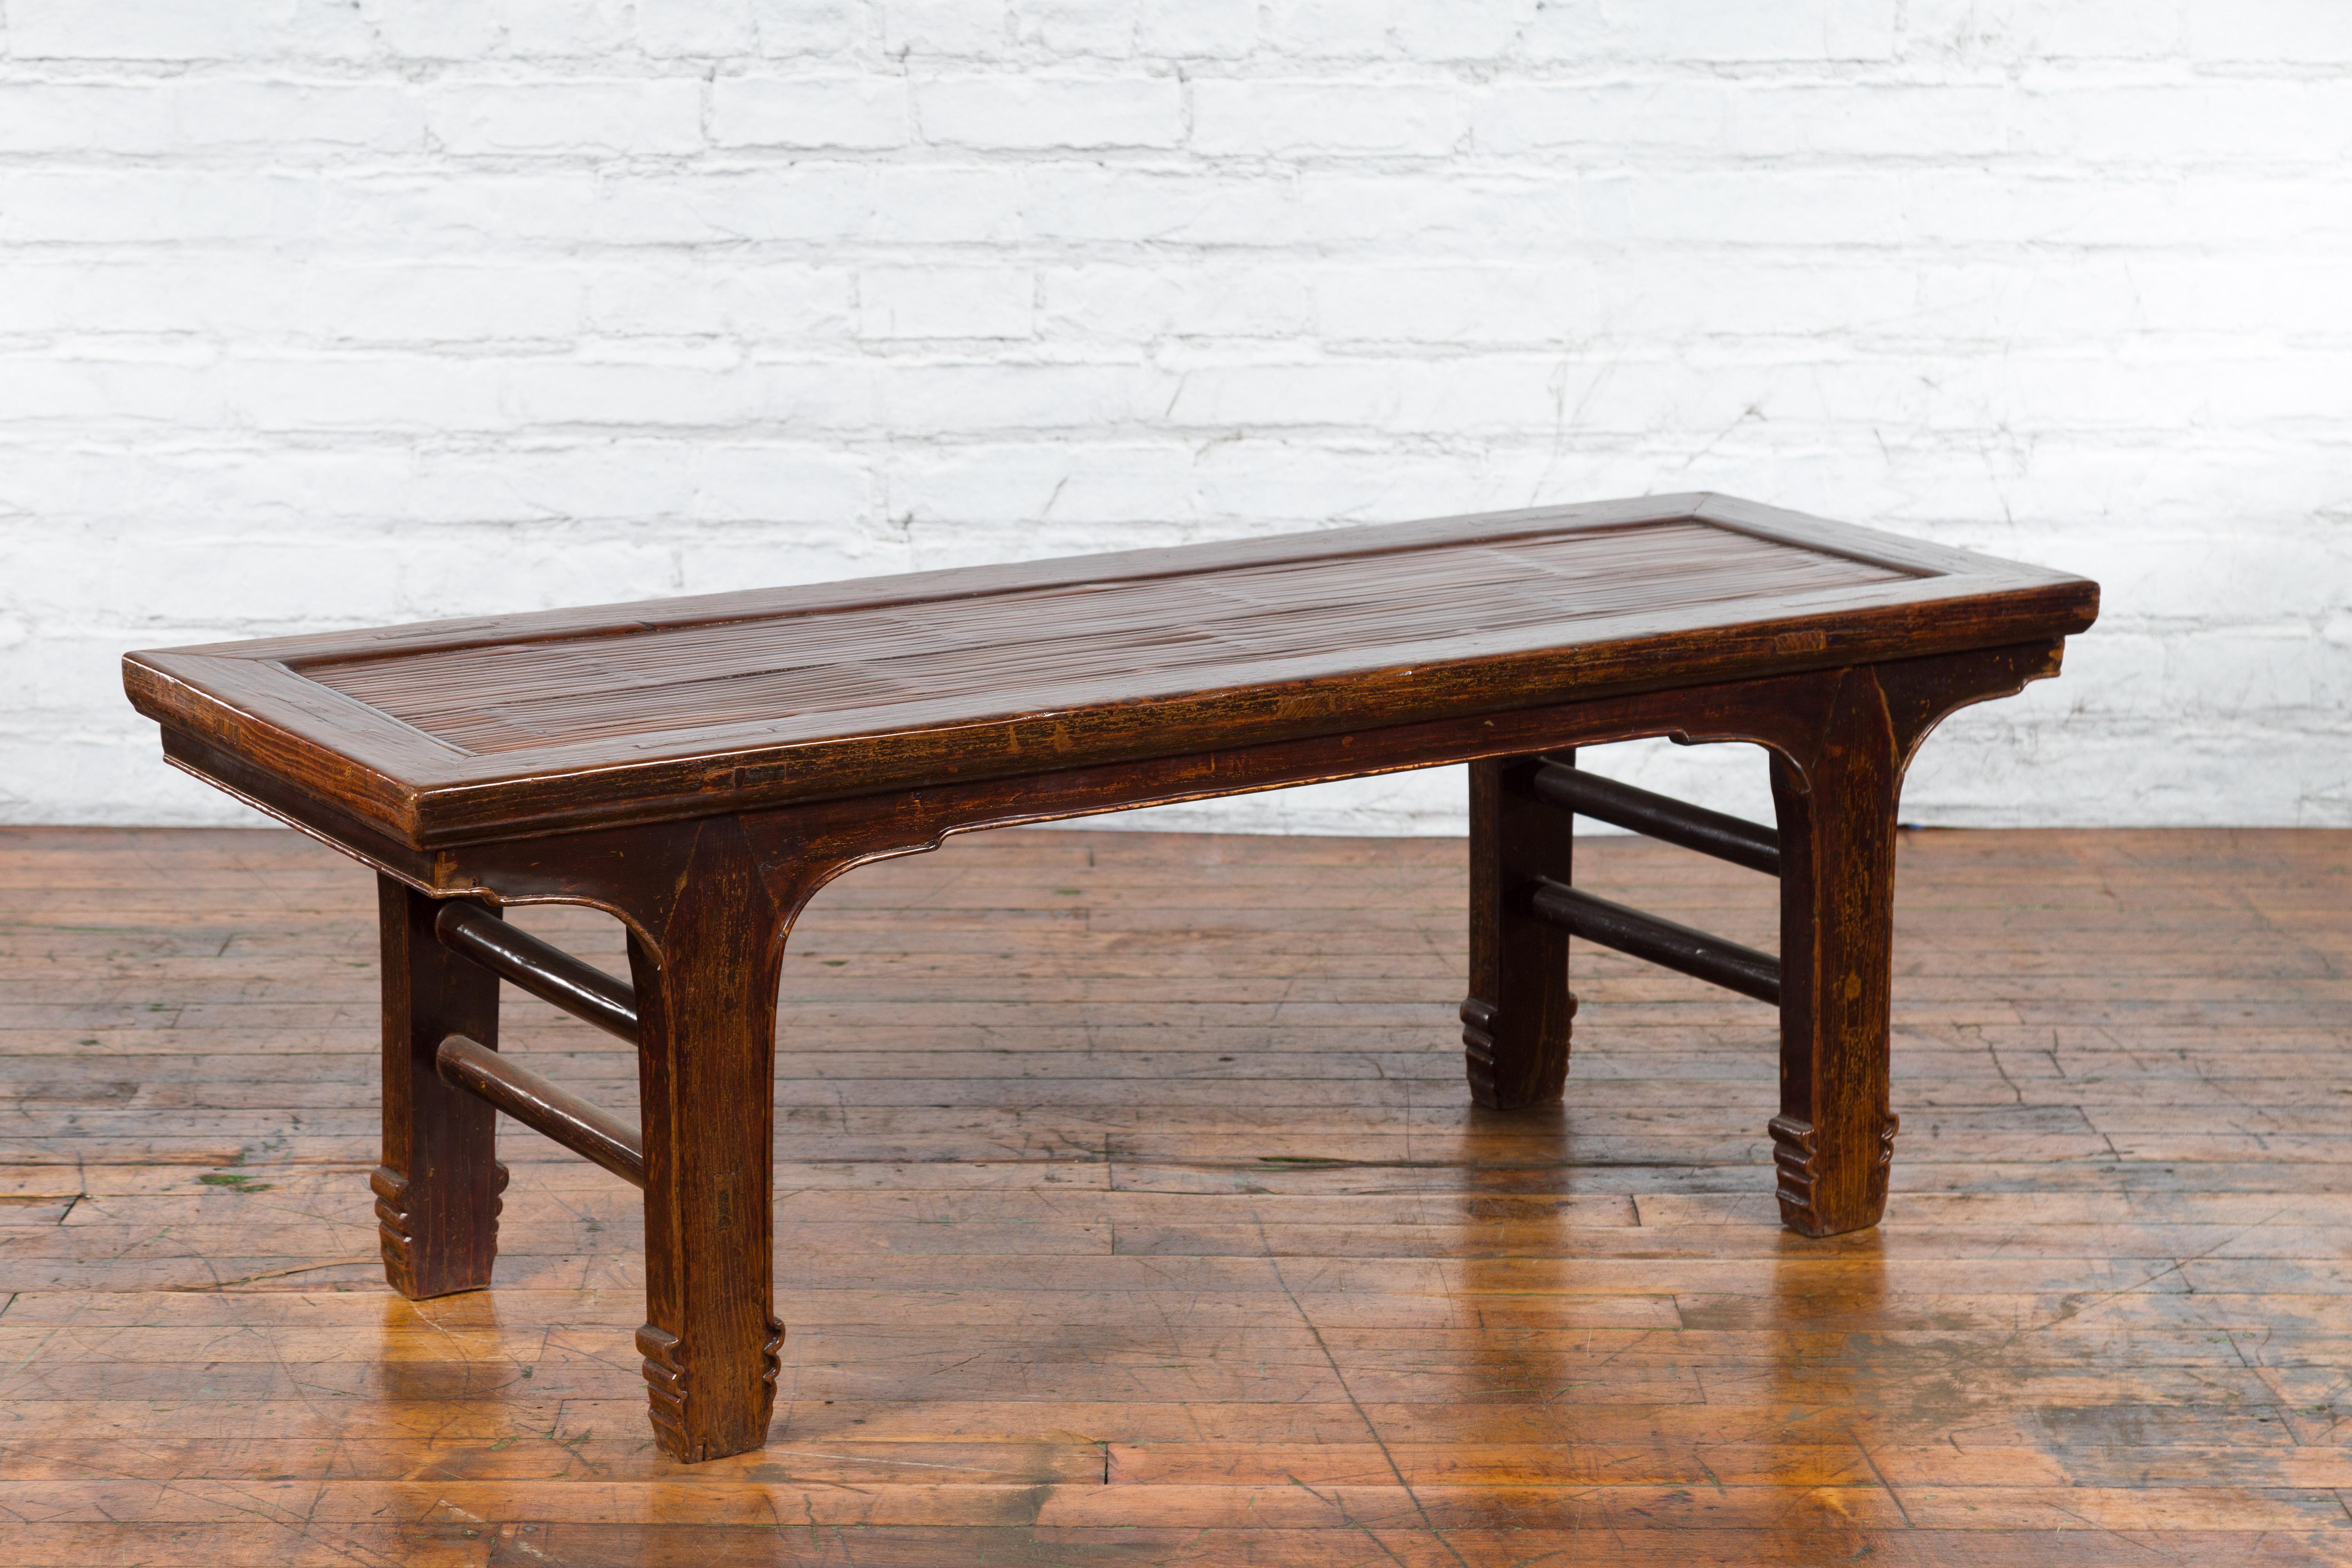 A Chinese low table from the early 20th century, with opium mat top and carved legs. Created in China during the early years of the 20th century, this low table could be used equally as a bench. The table features a rectangular bamboo opium mat top